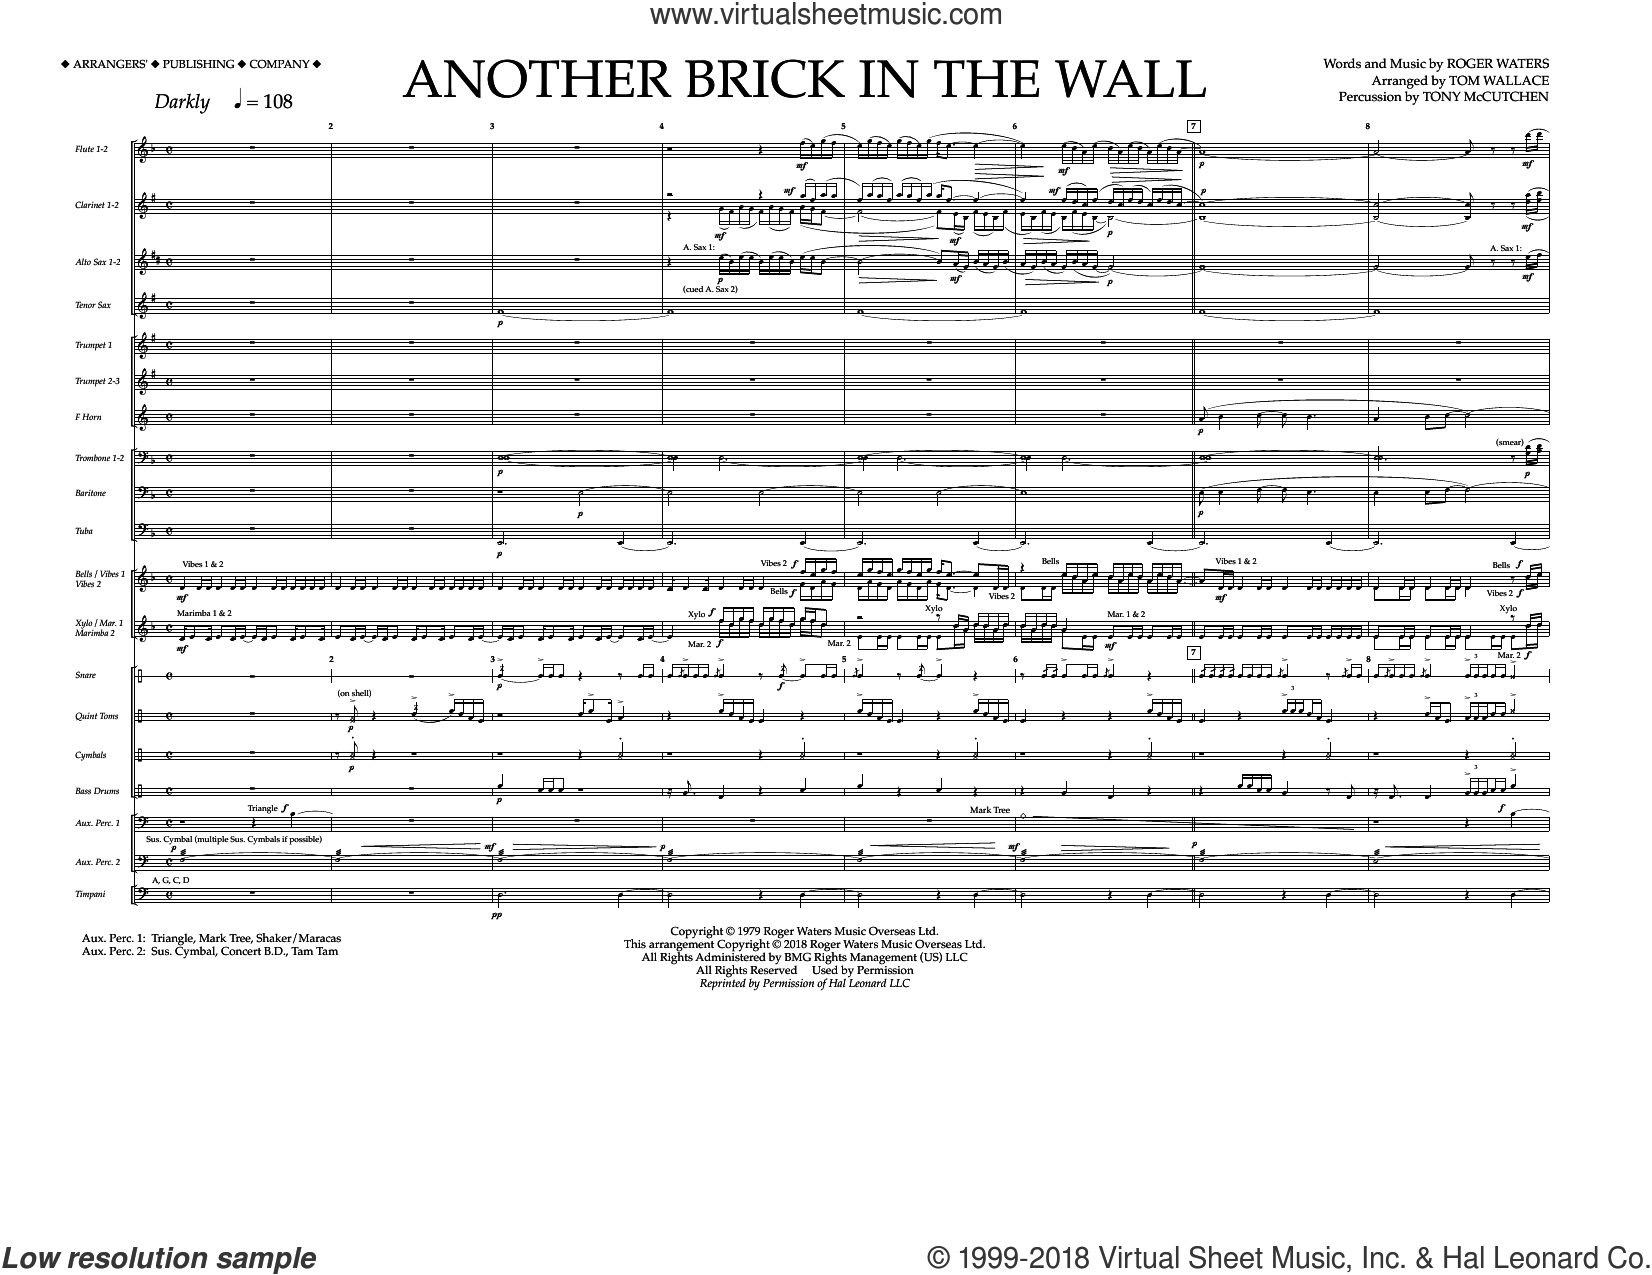 Another Brick in the Wall (Part 2) - Pink Floyd - Drum Sheet Music